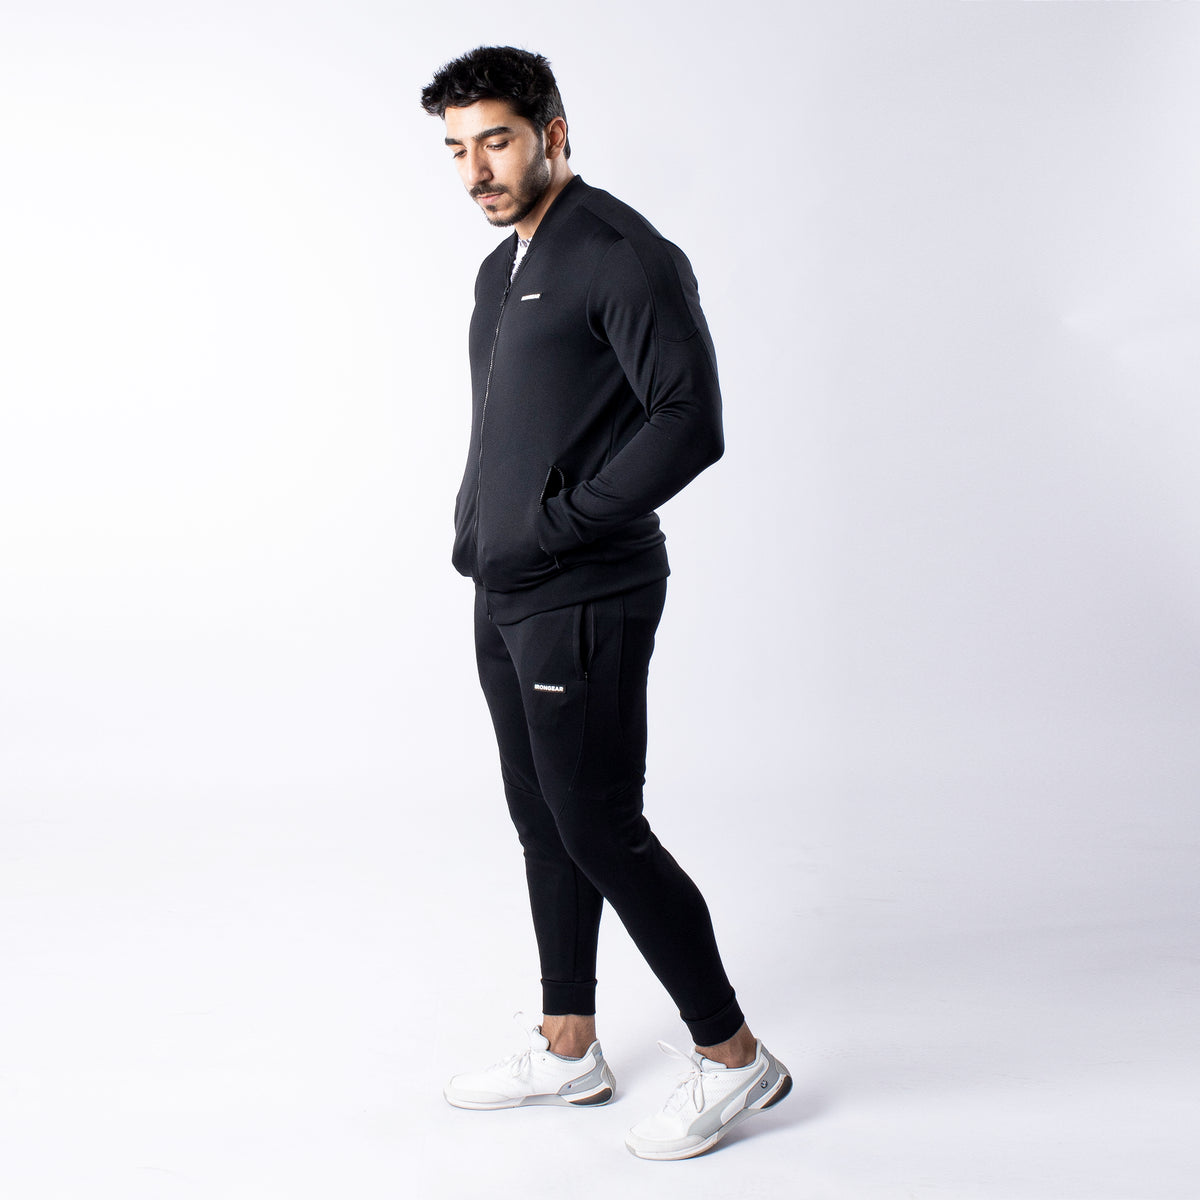 The Athleisure Tracksuit